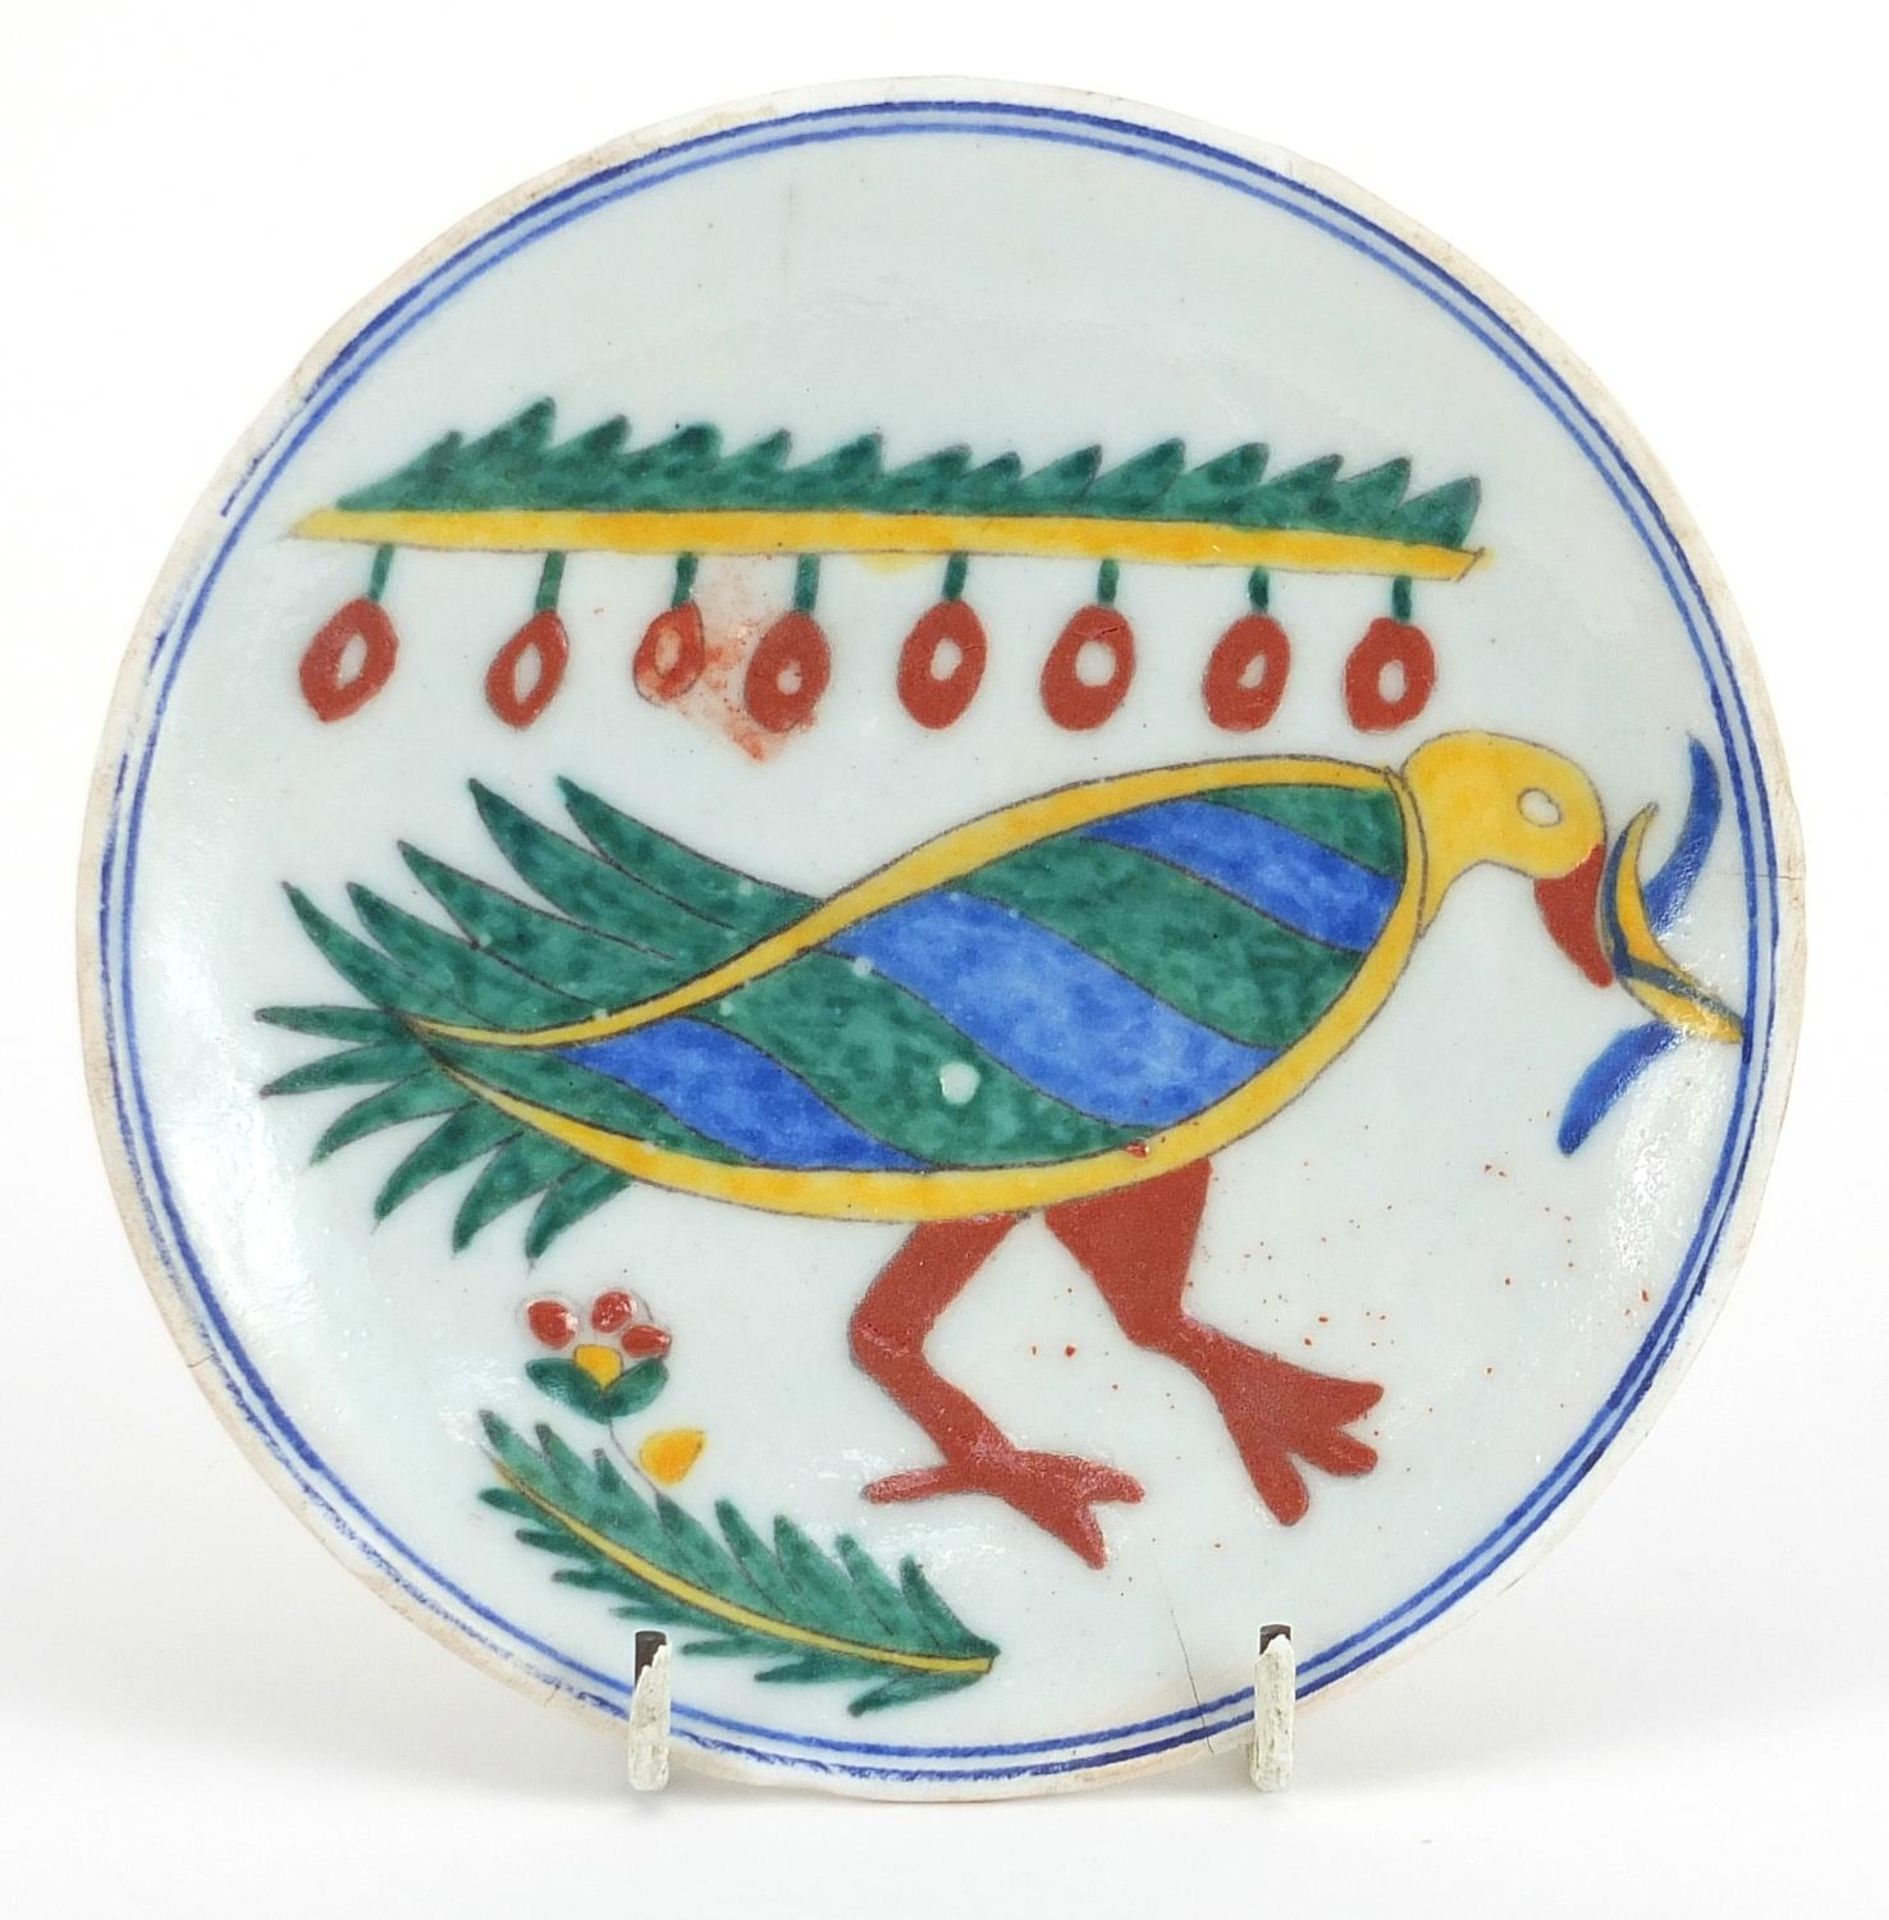 Turkish Kutahya pottery plate hand painted with a bird, 14.5cm in diameter